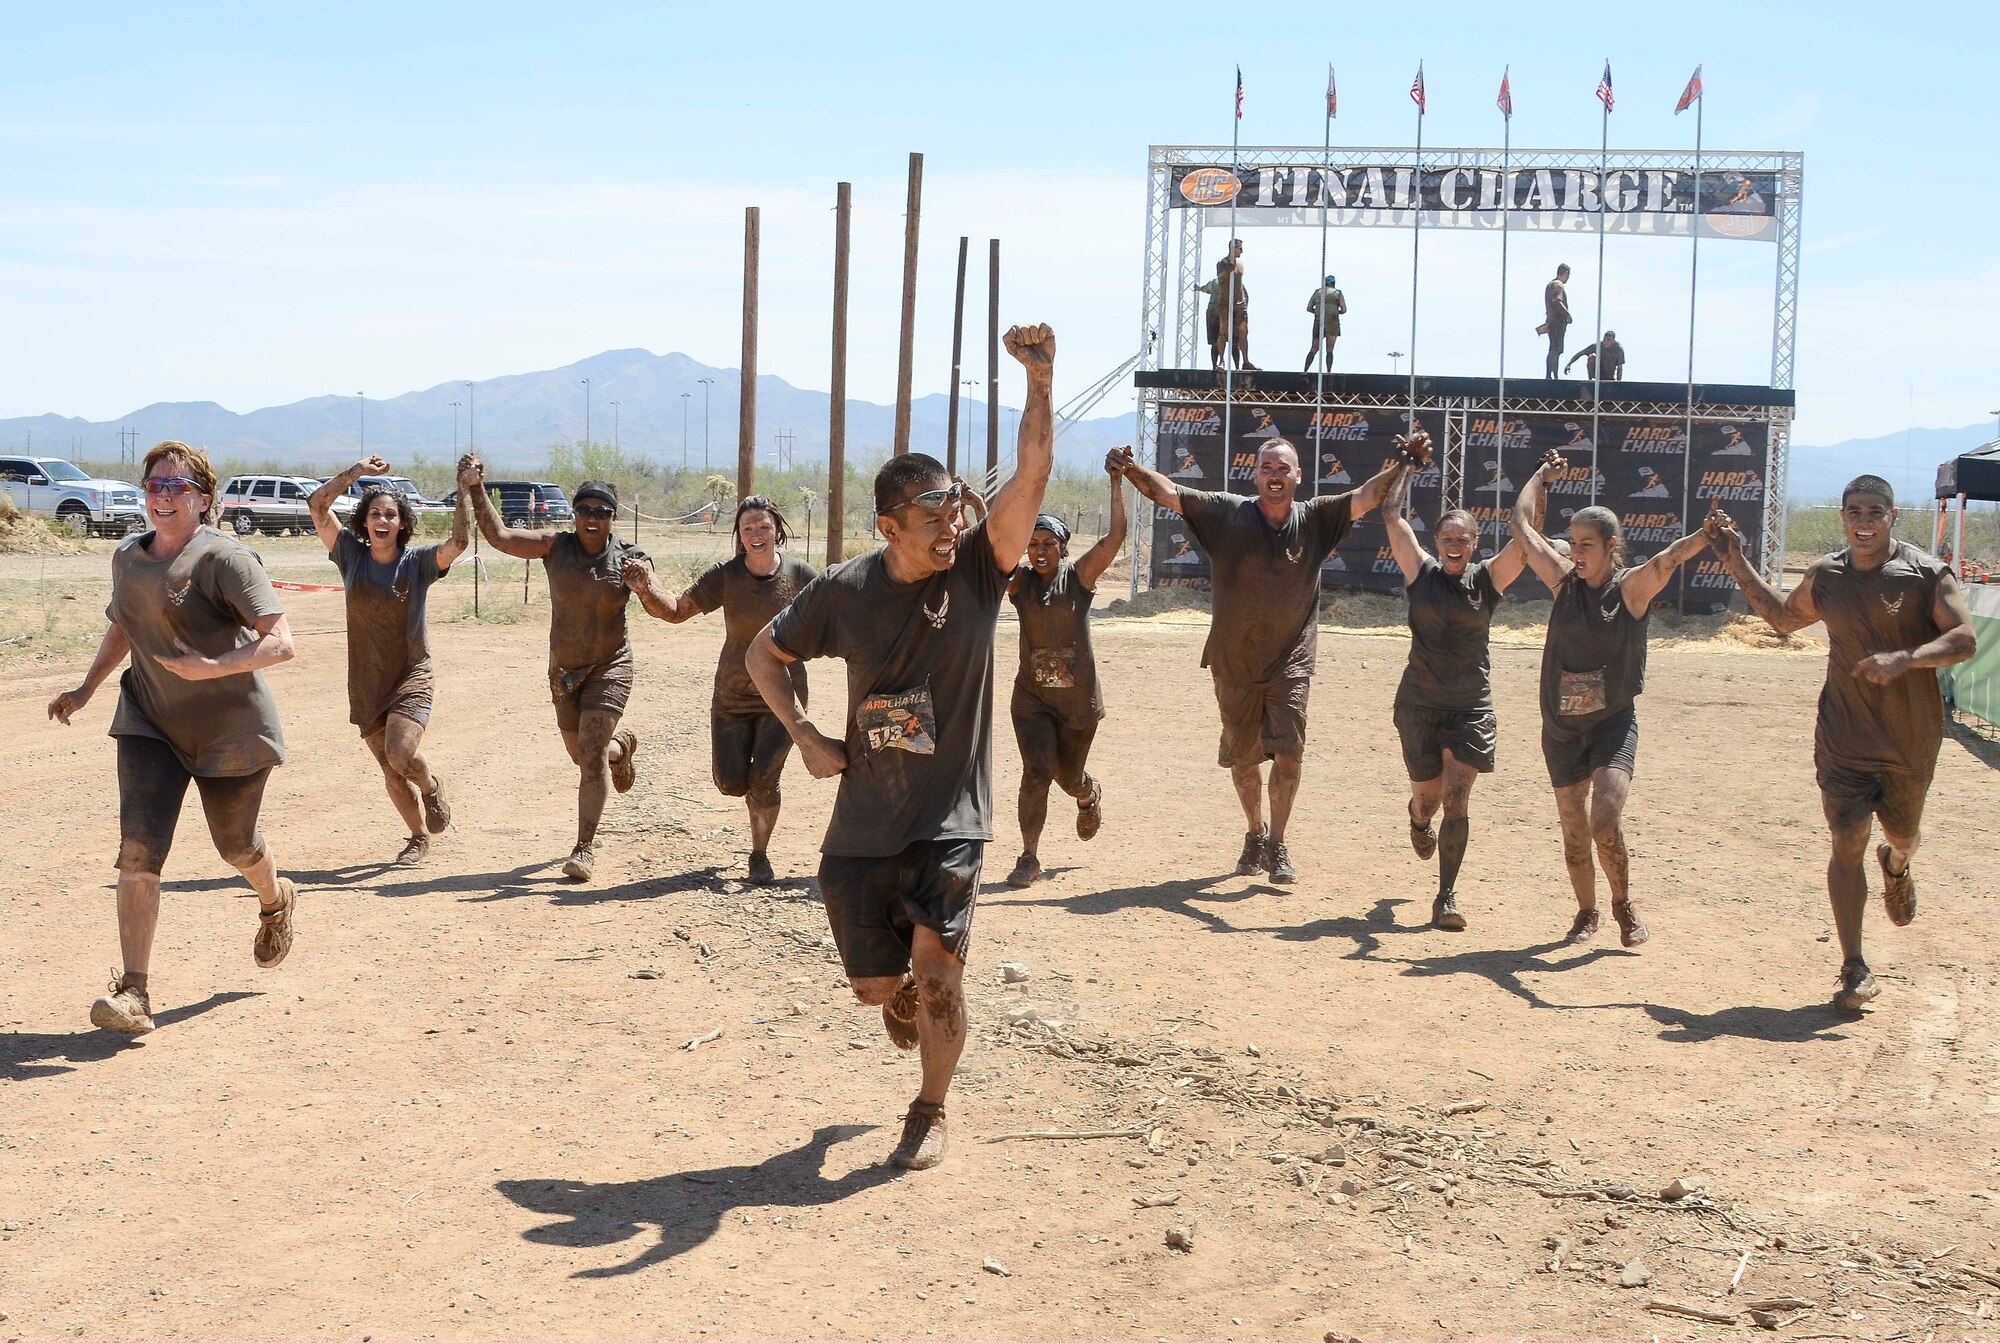 Members from 12th Air Force (Air Forces Southern) hold hands as the complete the Hard Charge Televised Obstacle Mission at the Pima County Fairgrounds in Tucson, Ariz., on March 29 as a team. The team of 11 members completed the four mile course with of obstacles designed to utilize a mix of strength, stamina, balance, and body awareness  that pushed participants to both mental and physical fatigue. (U.S. Air Force photo by Staff Sgt. Adam Grant/Released)